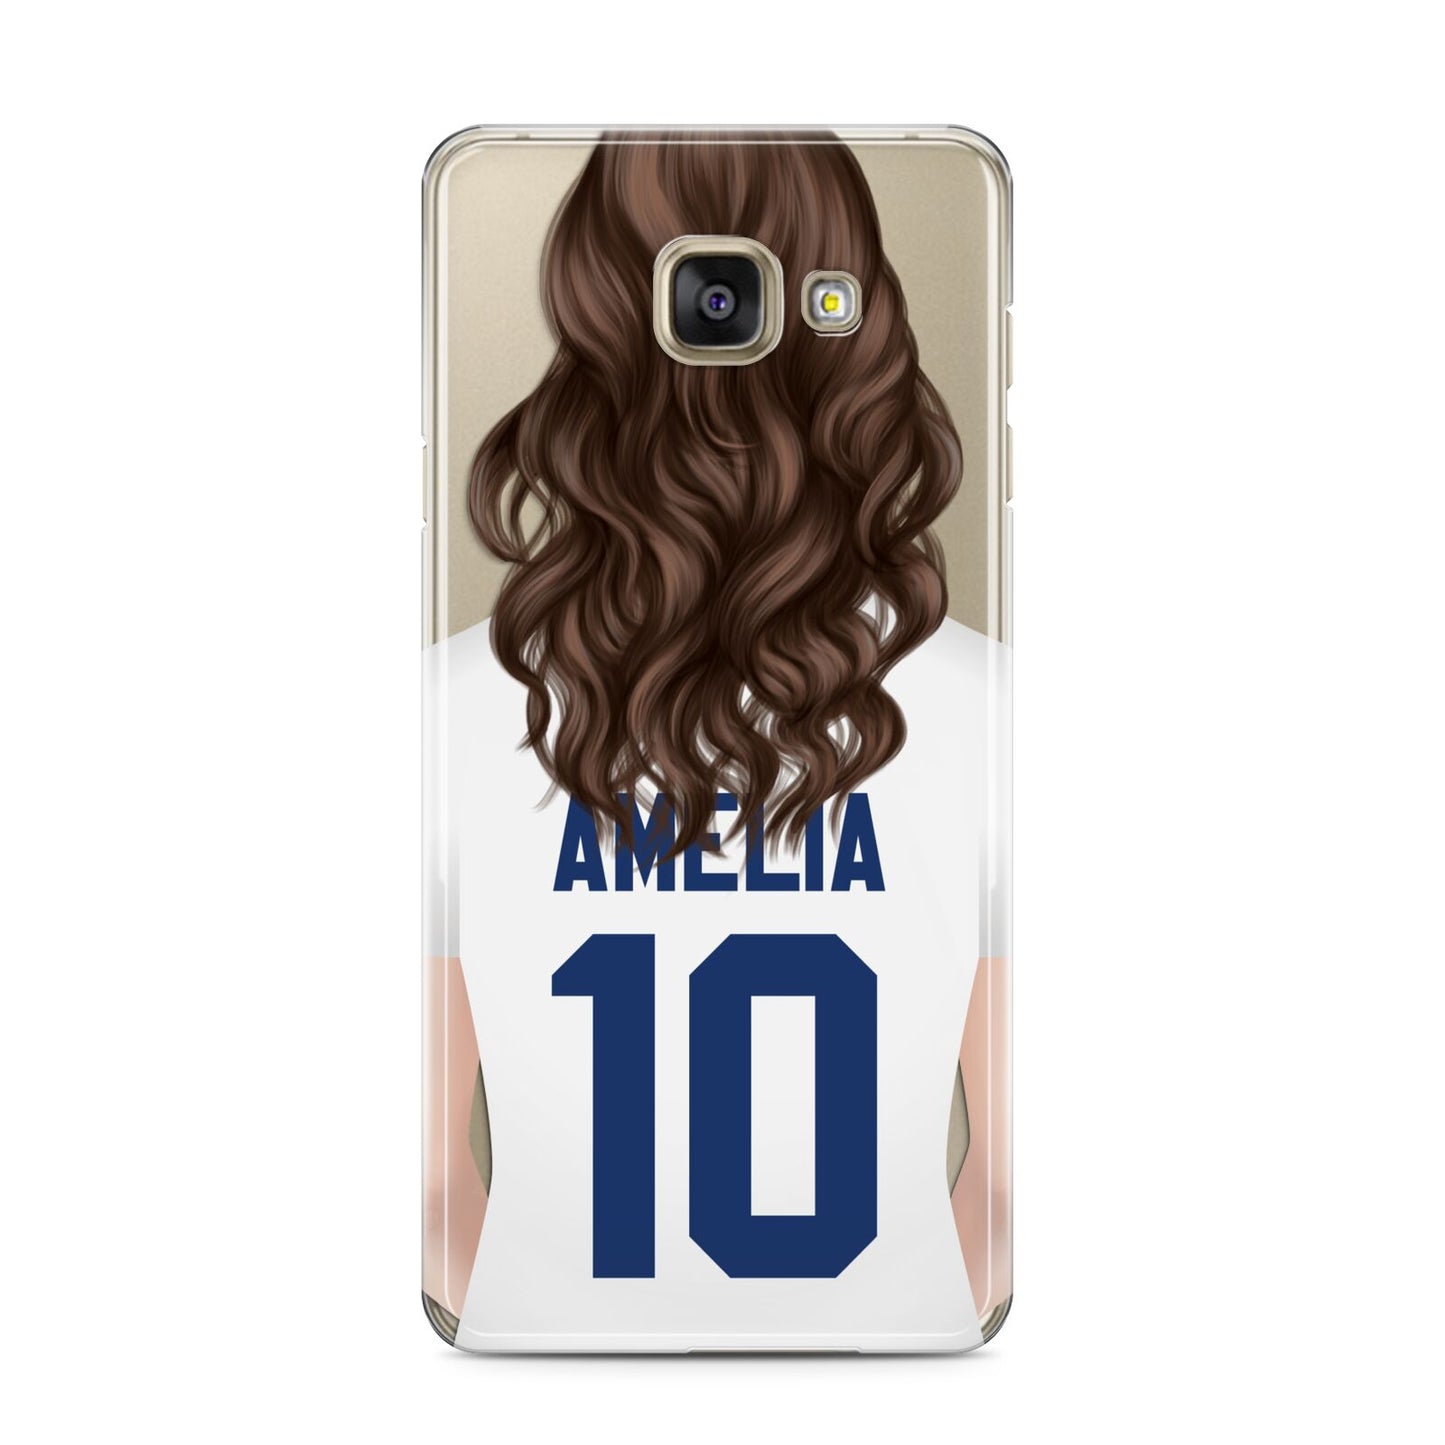 Womens Footballer Personalised Samsung Galaxy A3 2016 Case on gold phone